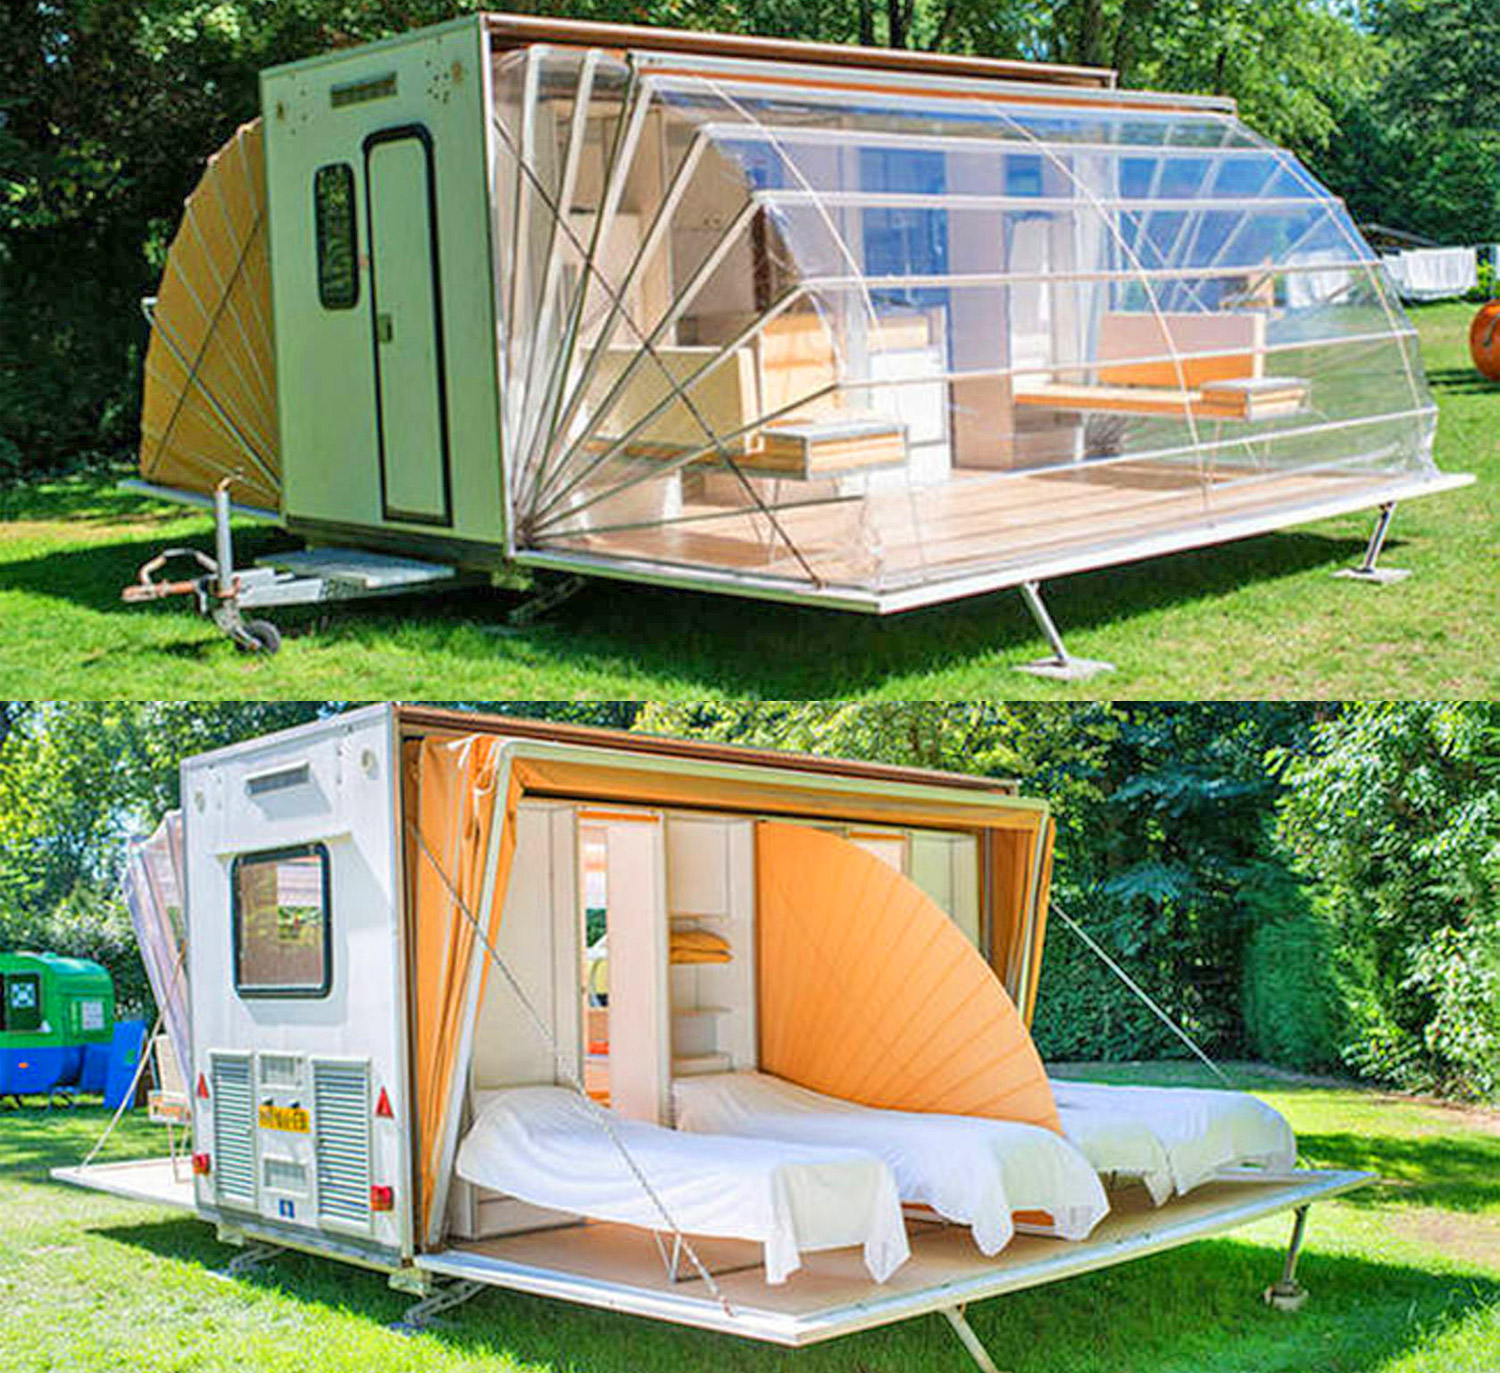 Folding Camping Trailer Expands To Triple Its Size With Fold-Out Awnings